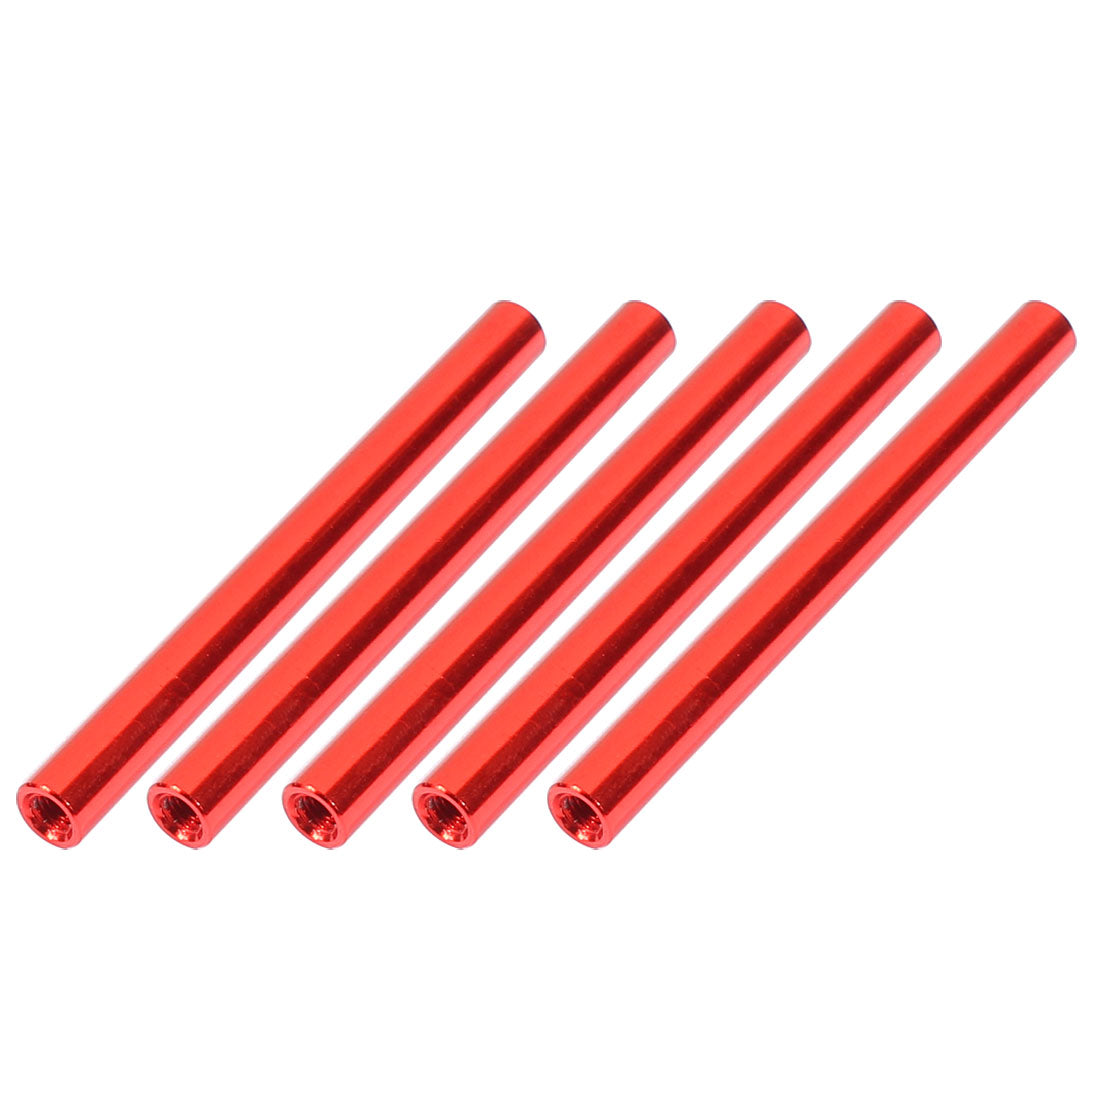 uxcell Uxcell 5 Pcs M3 x 55mm Round Aluminiferous Column Alloy Standoff Spacer Stud Fastener for Quadcopter Red